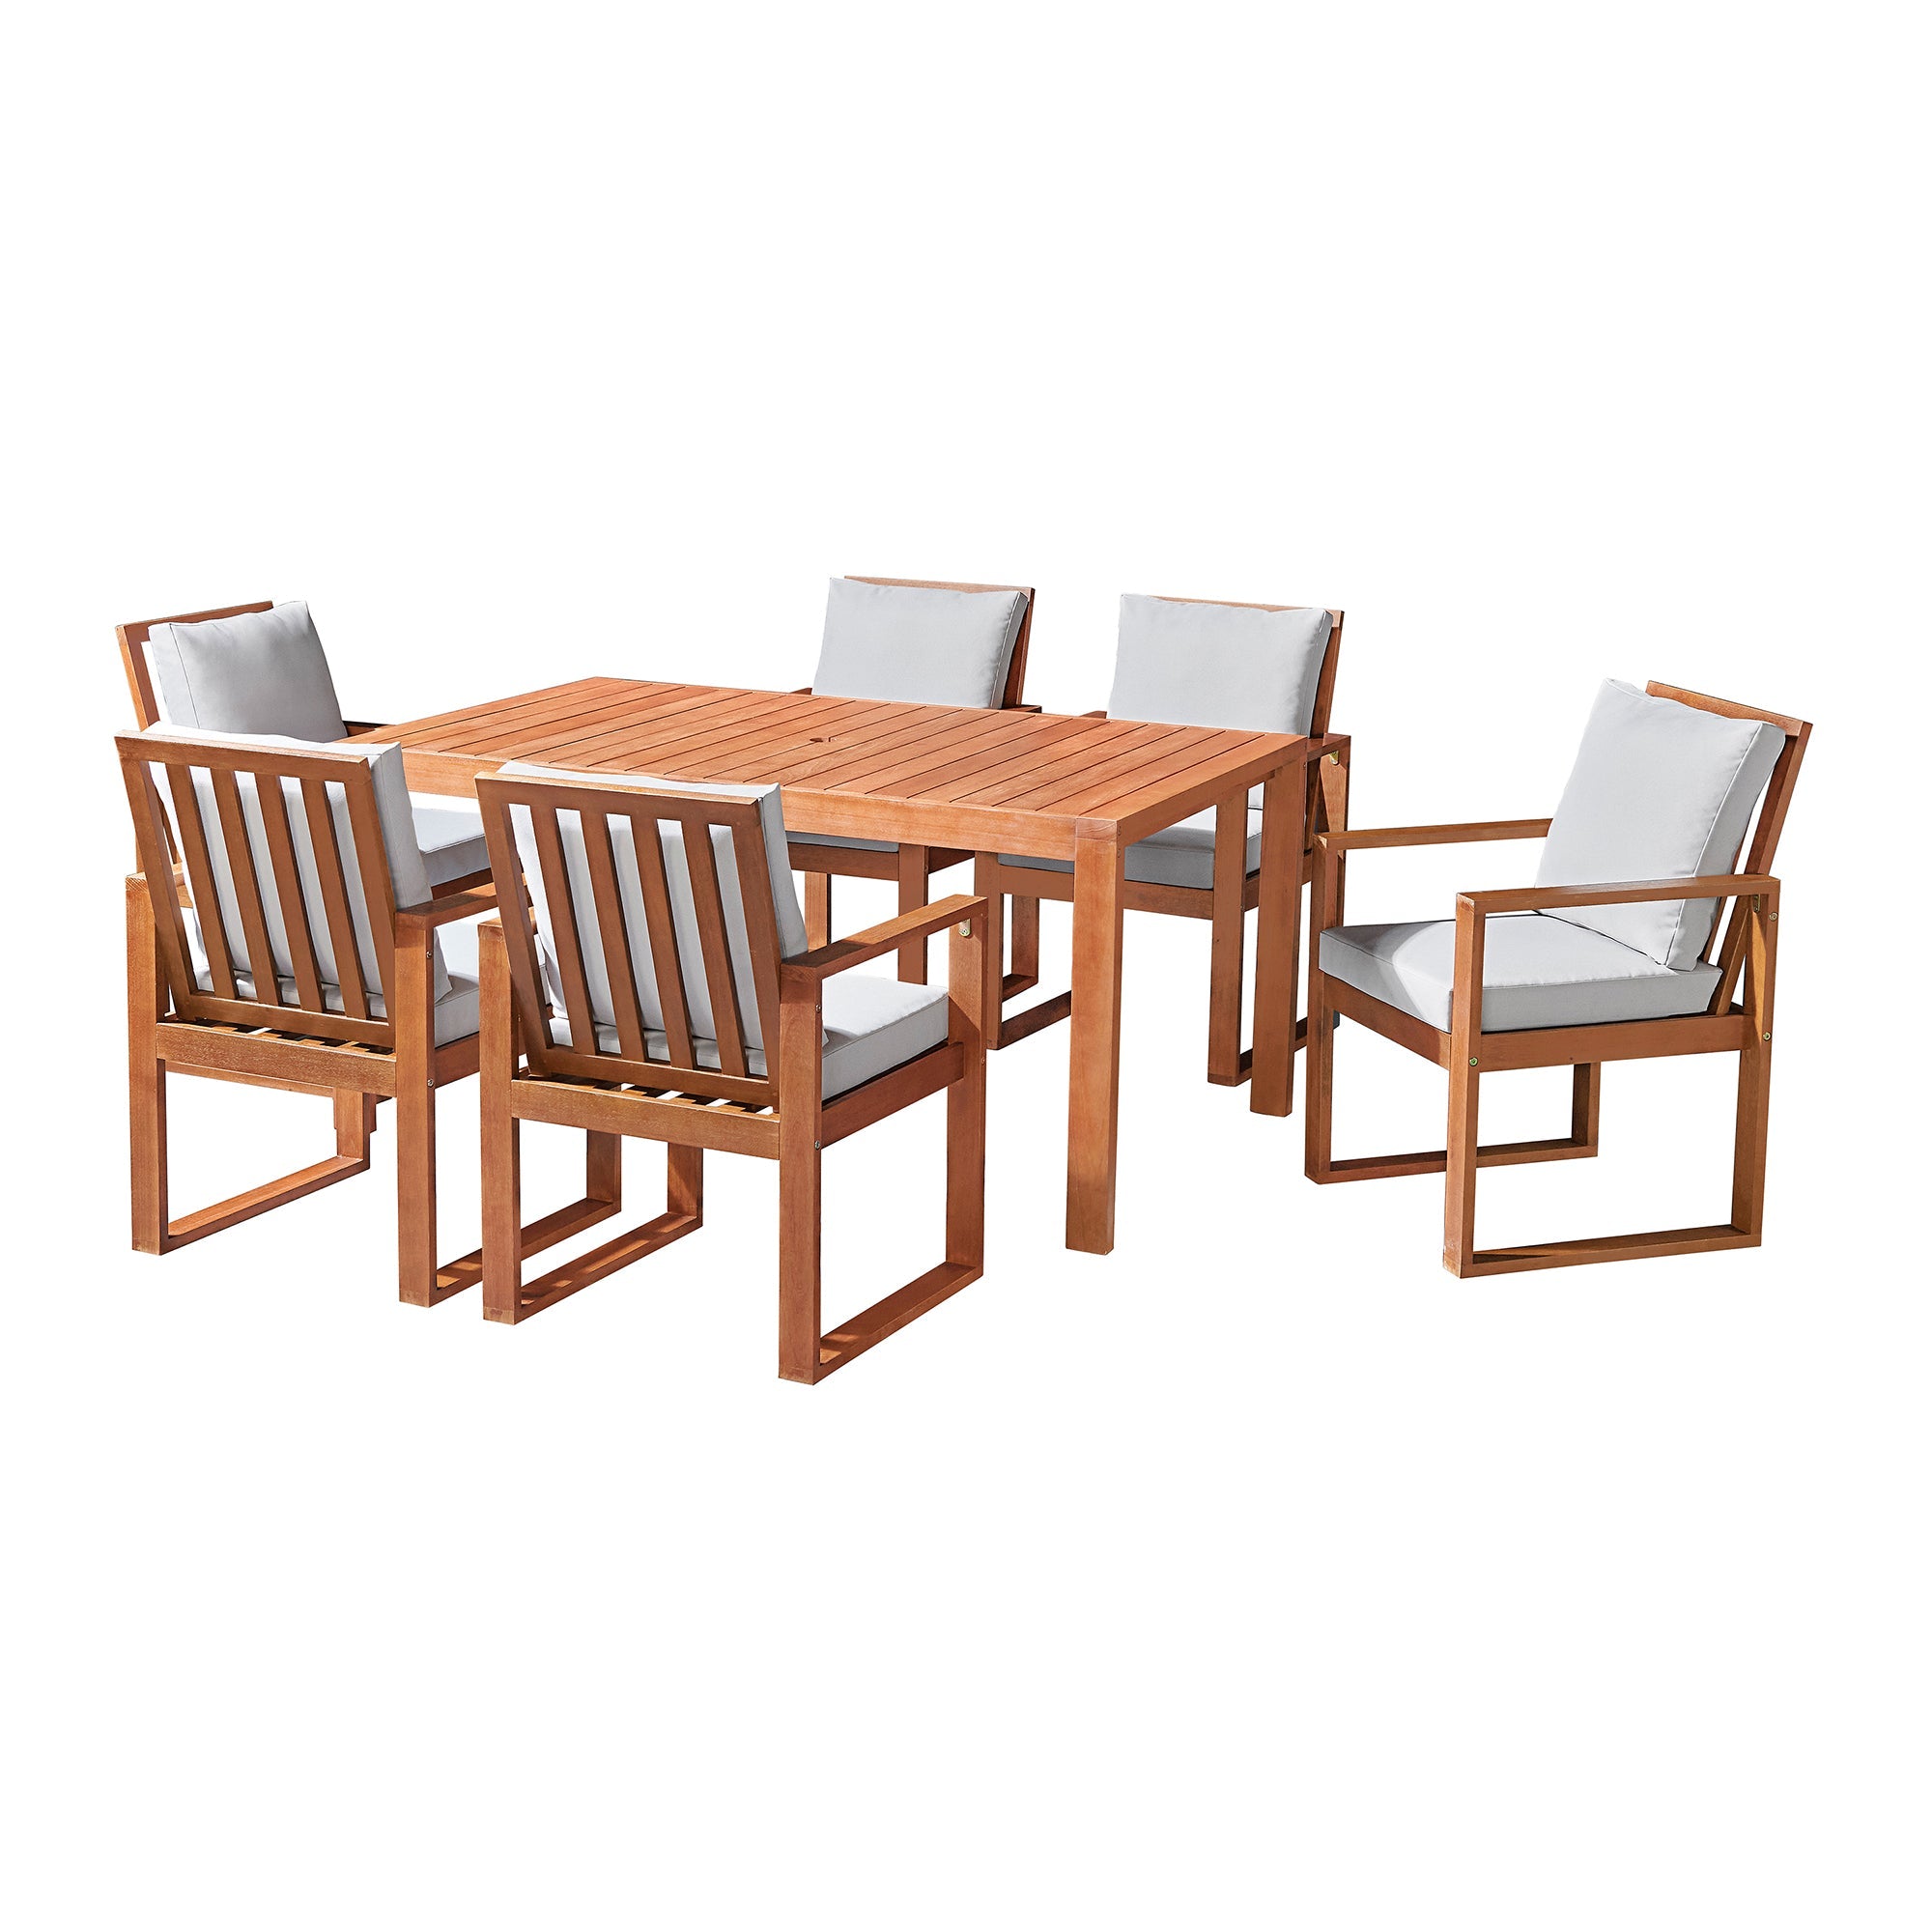 Natural-Weston-Eucalyptus-Wood-Outdoor-Dining-Table-with-6-Dining-Chairs,-Set-of-7-Outdoor-Dining